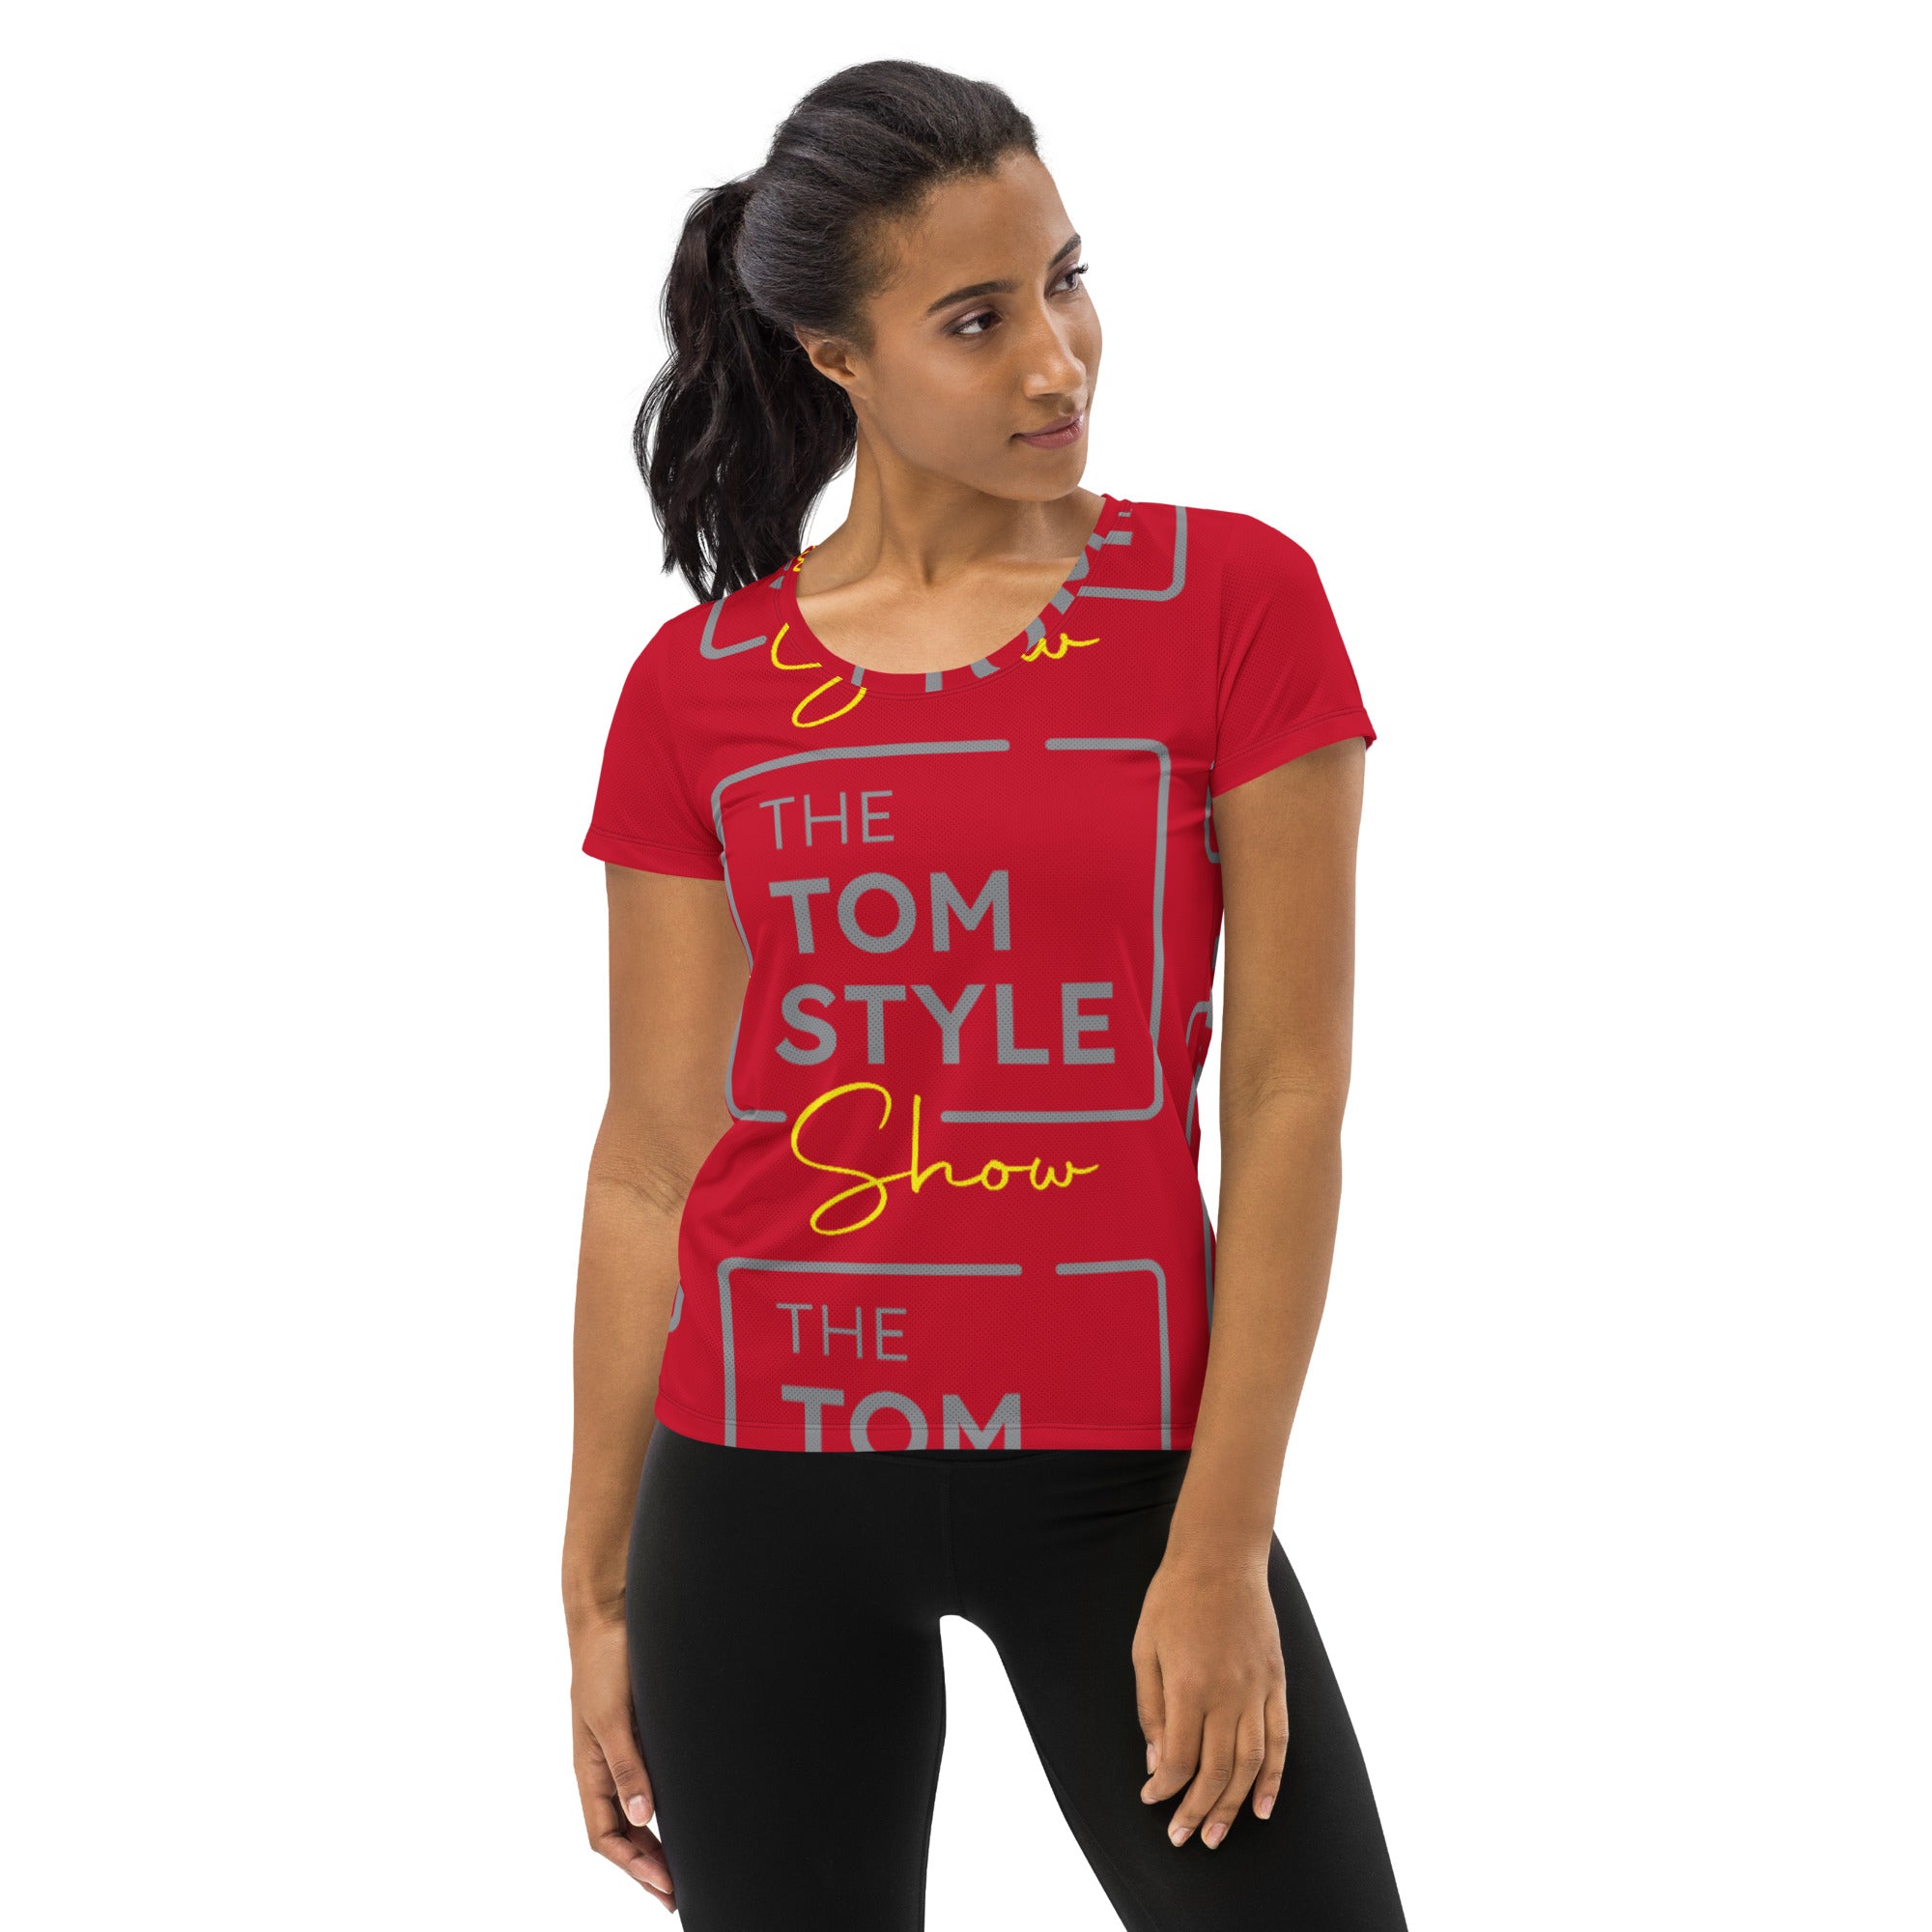 Women's Athletic T-shirt - Tom Style Show